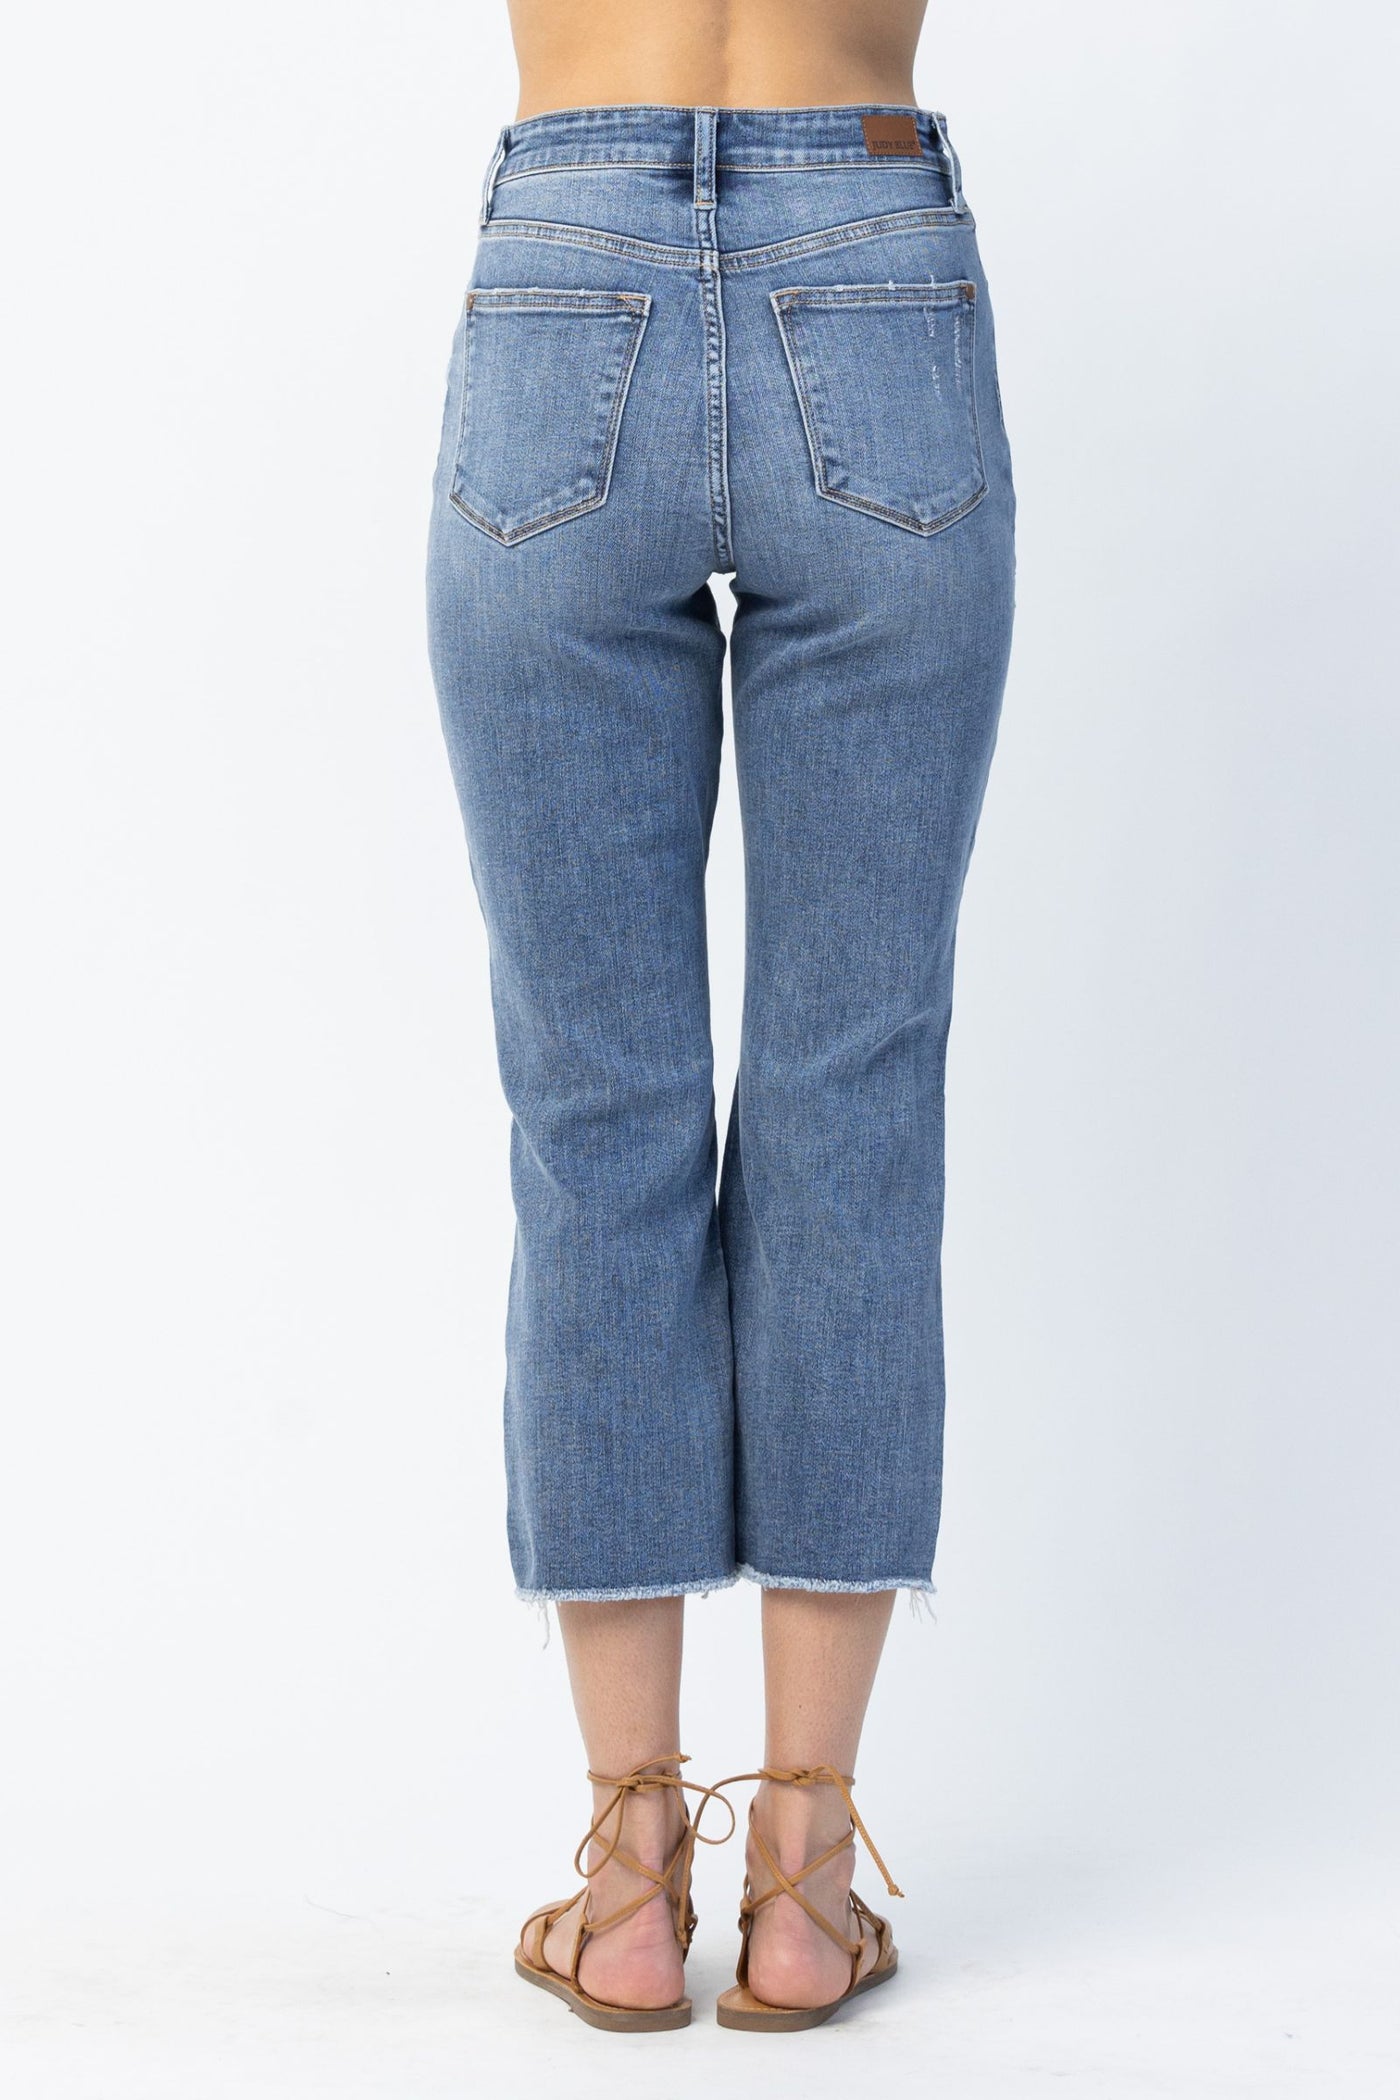 Judy Blue High Rise Cropped Jeans - Corinne Boutique Family Owned and Operated USA